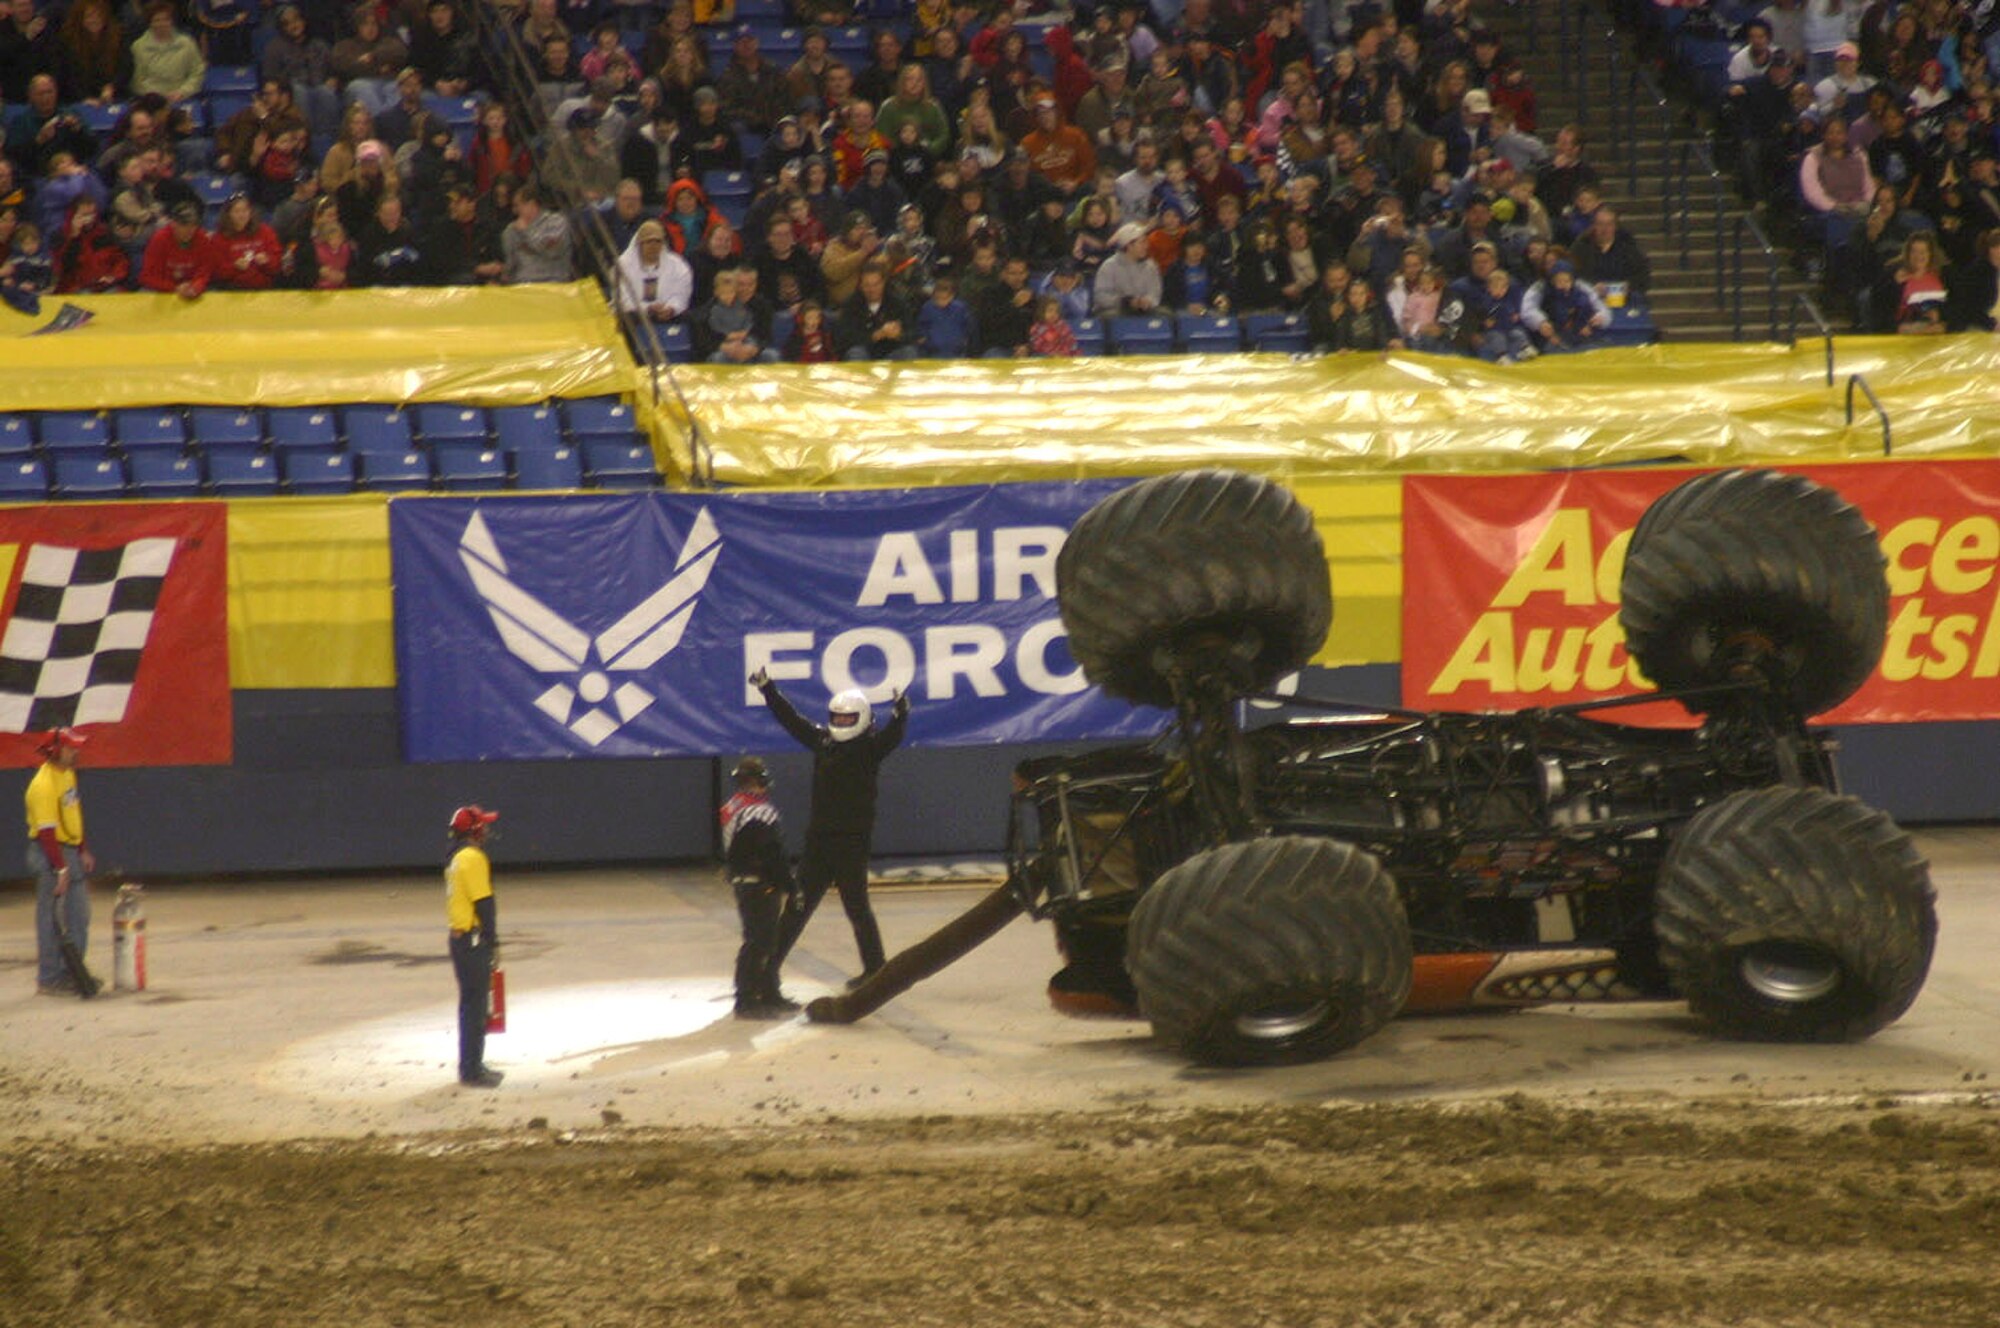 Monster Mutt driver Bobby Z emerges from his overturned 1951 Mercury shelled monster truck and poses with thumbs up in front of the Air Force banner at the Tacoma Dome Jan. 12 in Tacoma, Wash. The driver couldn't keep the 66-inch tires under the precious pooch while navigating a sharp turn in the freestyle competition of the event.  Recruiters from the 361st Recruiting Squadron were on hand over the weekend passing out Air Force literature and promotion items and answering questions to those enquiring more on life in the Air Force.  (U.S. Air Force photo by Tech. Sgt. Chuck Marsh)